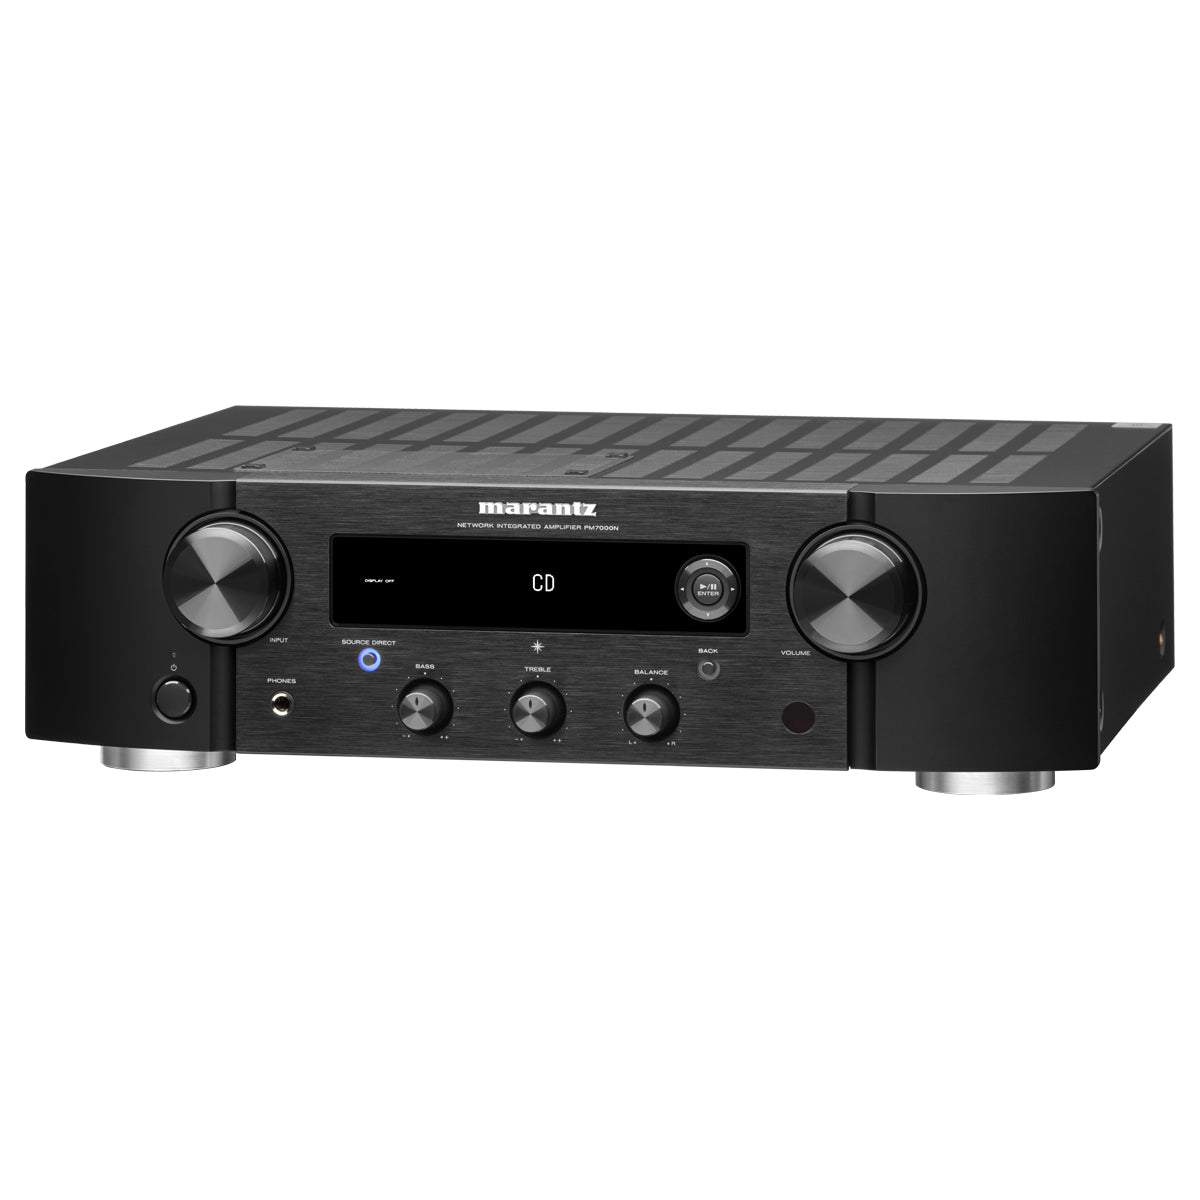 Marantz PM7000N 60W Integrated Amplifier with Heos Black - The Audio Experts